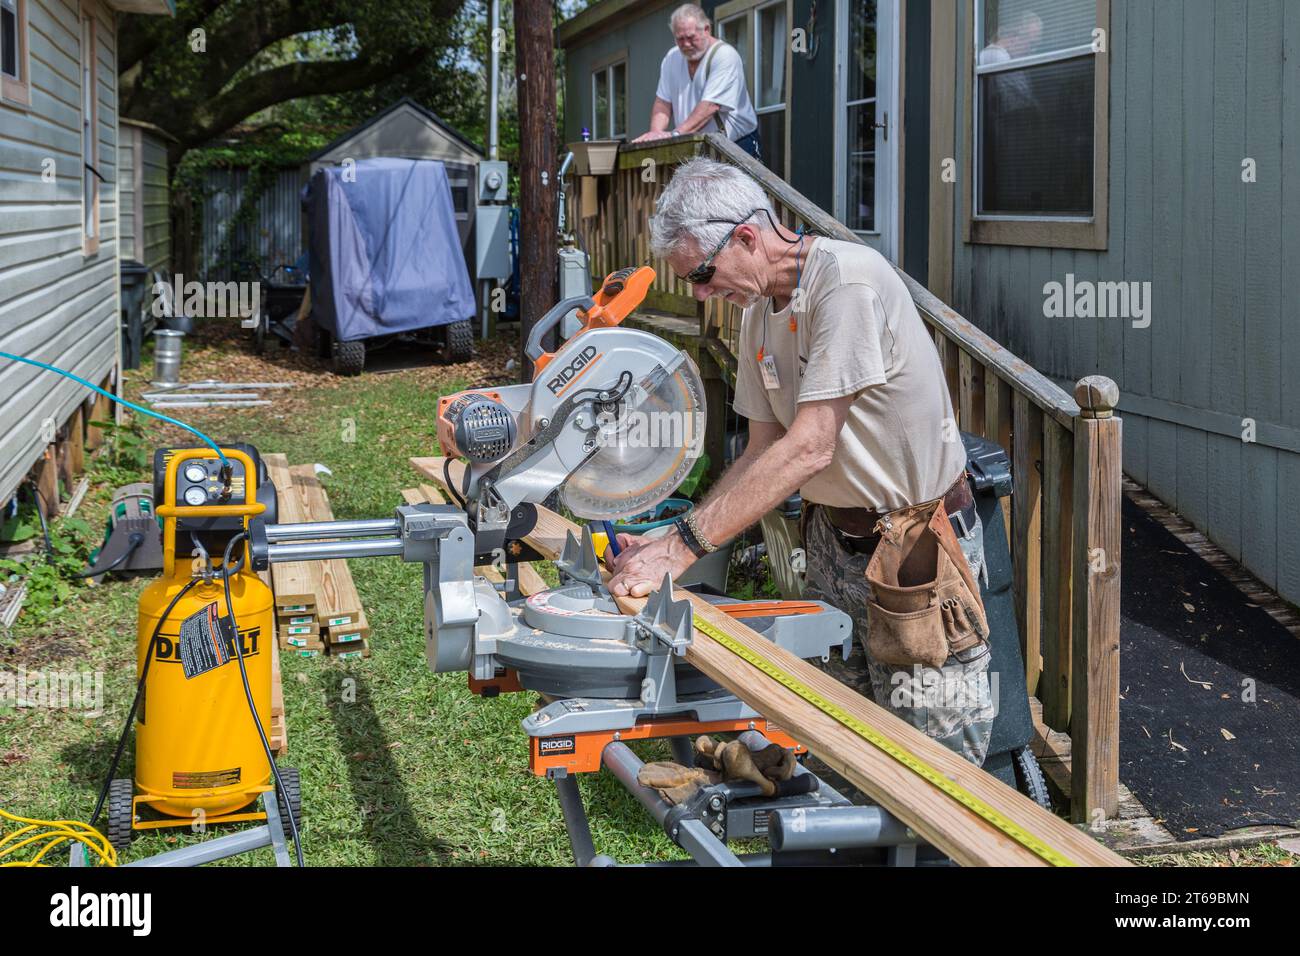 Member of 8 Days of Hope faith based charity volunteer team cutting lumber while repairing a home that was flooded in Houston, Texas Stock Photo